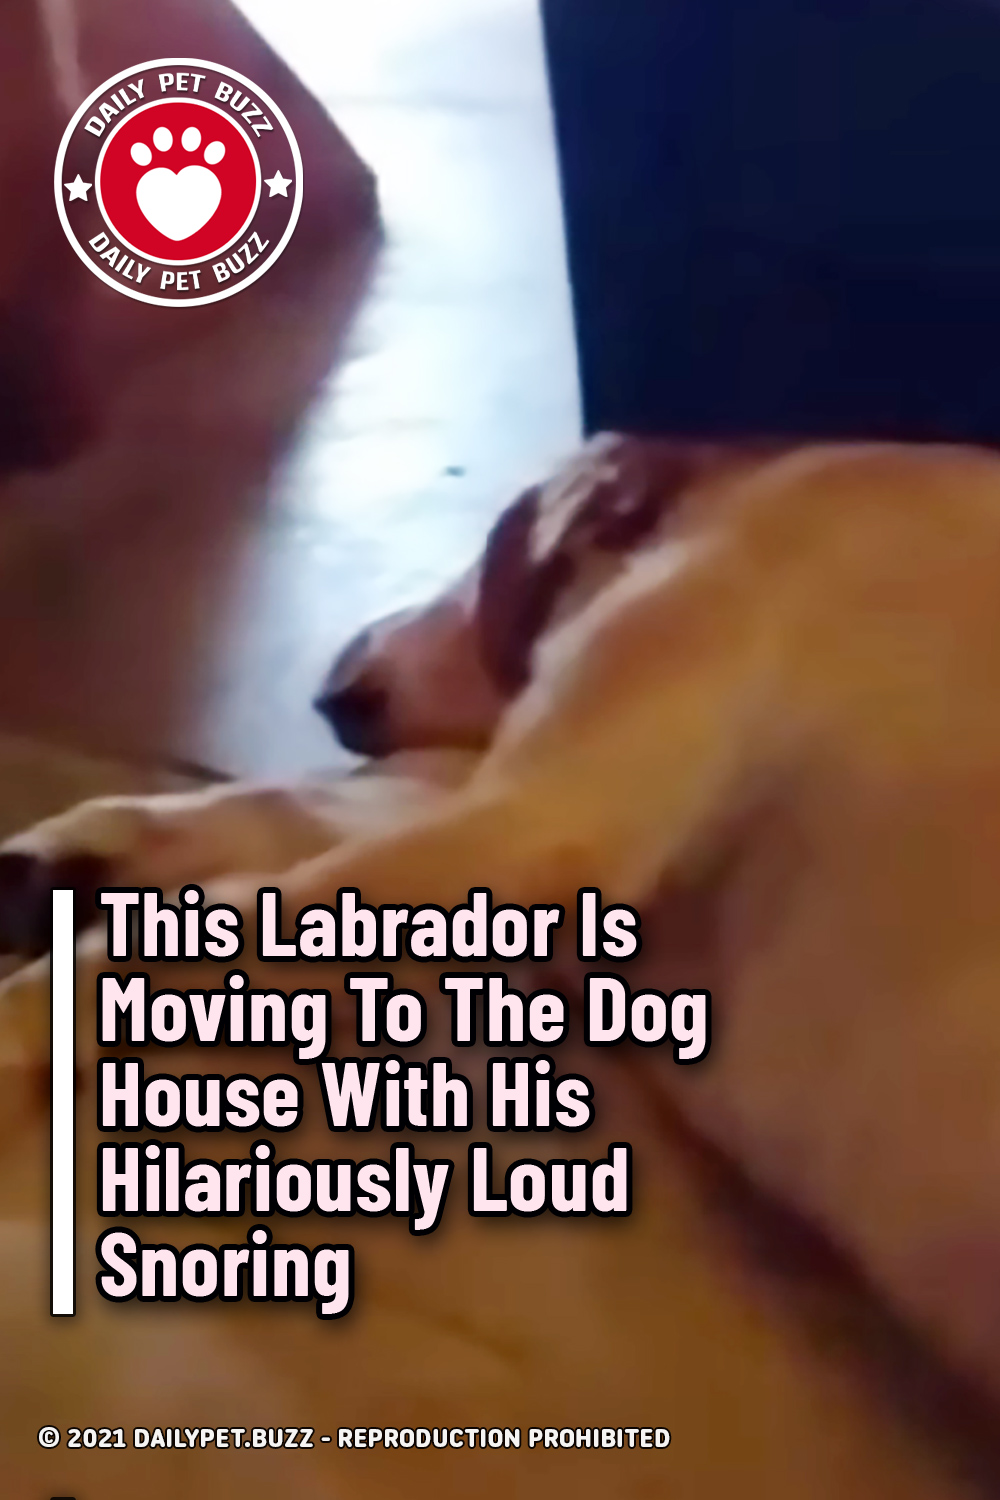 This Labrador Is Moving To The Dog House With His Hilariously Loud Snoring